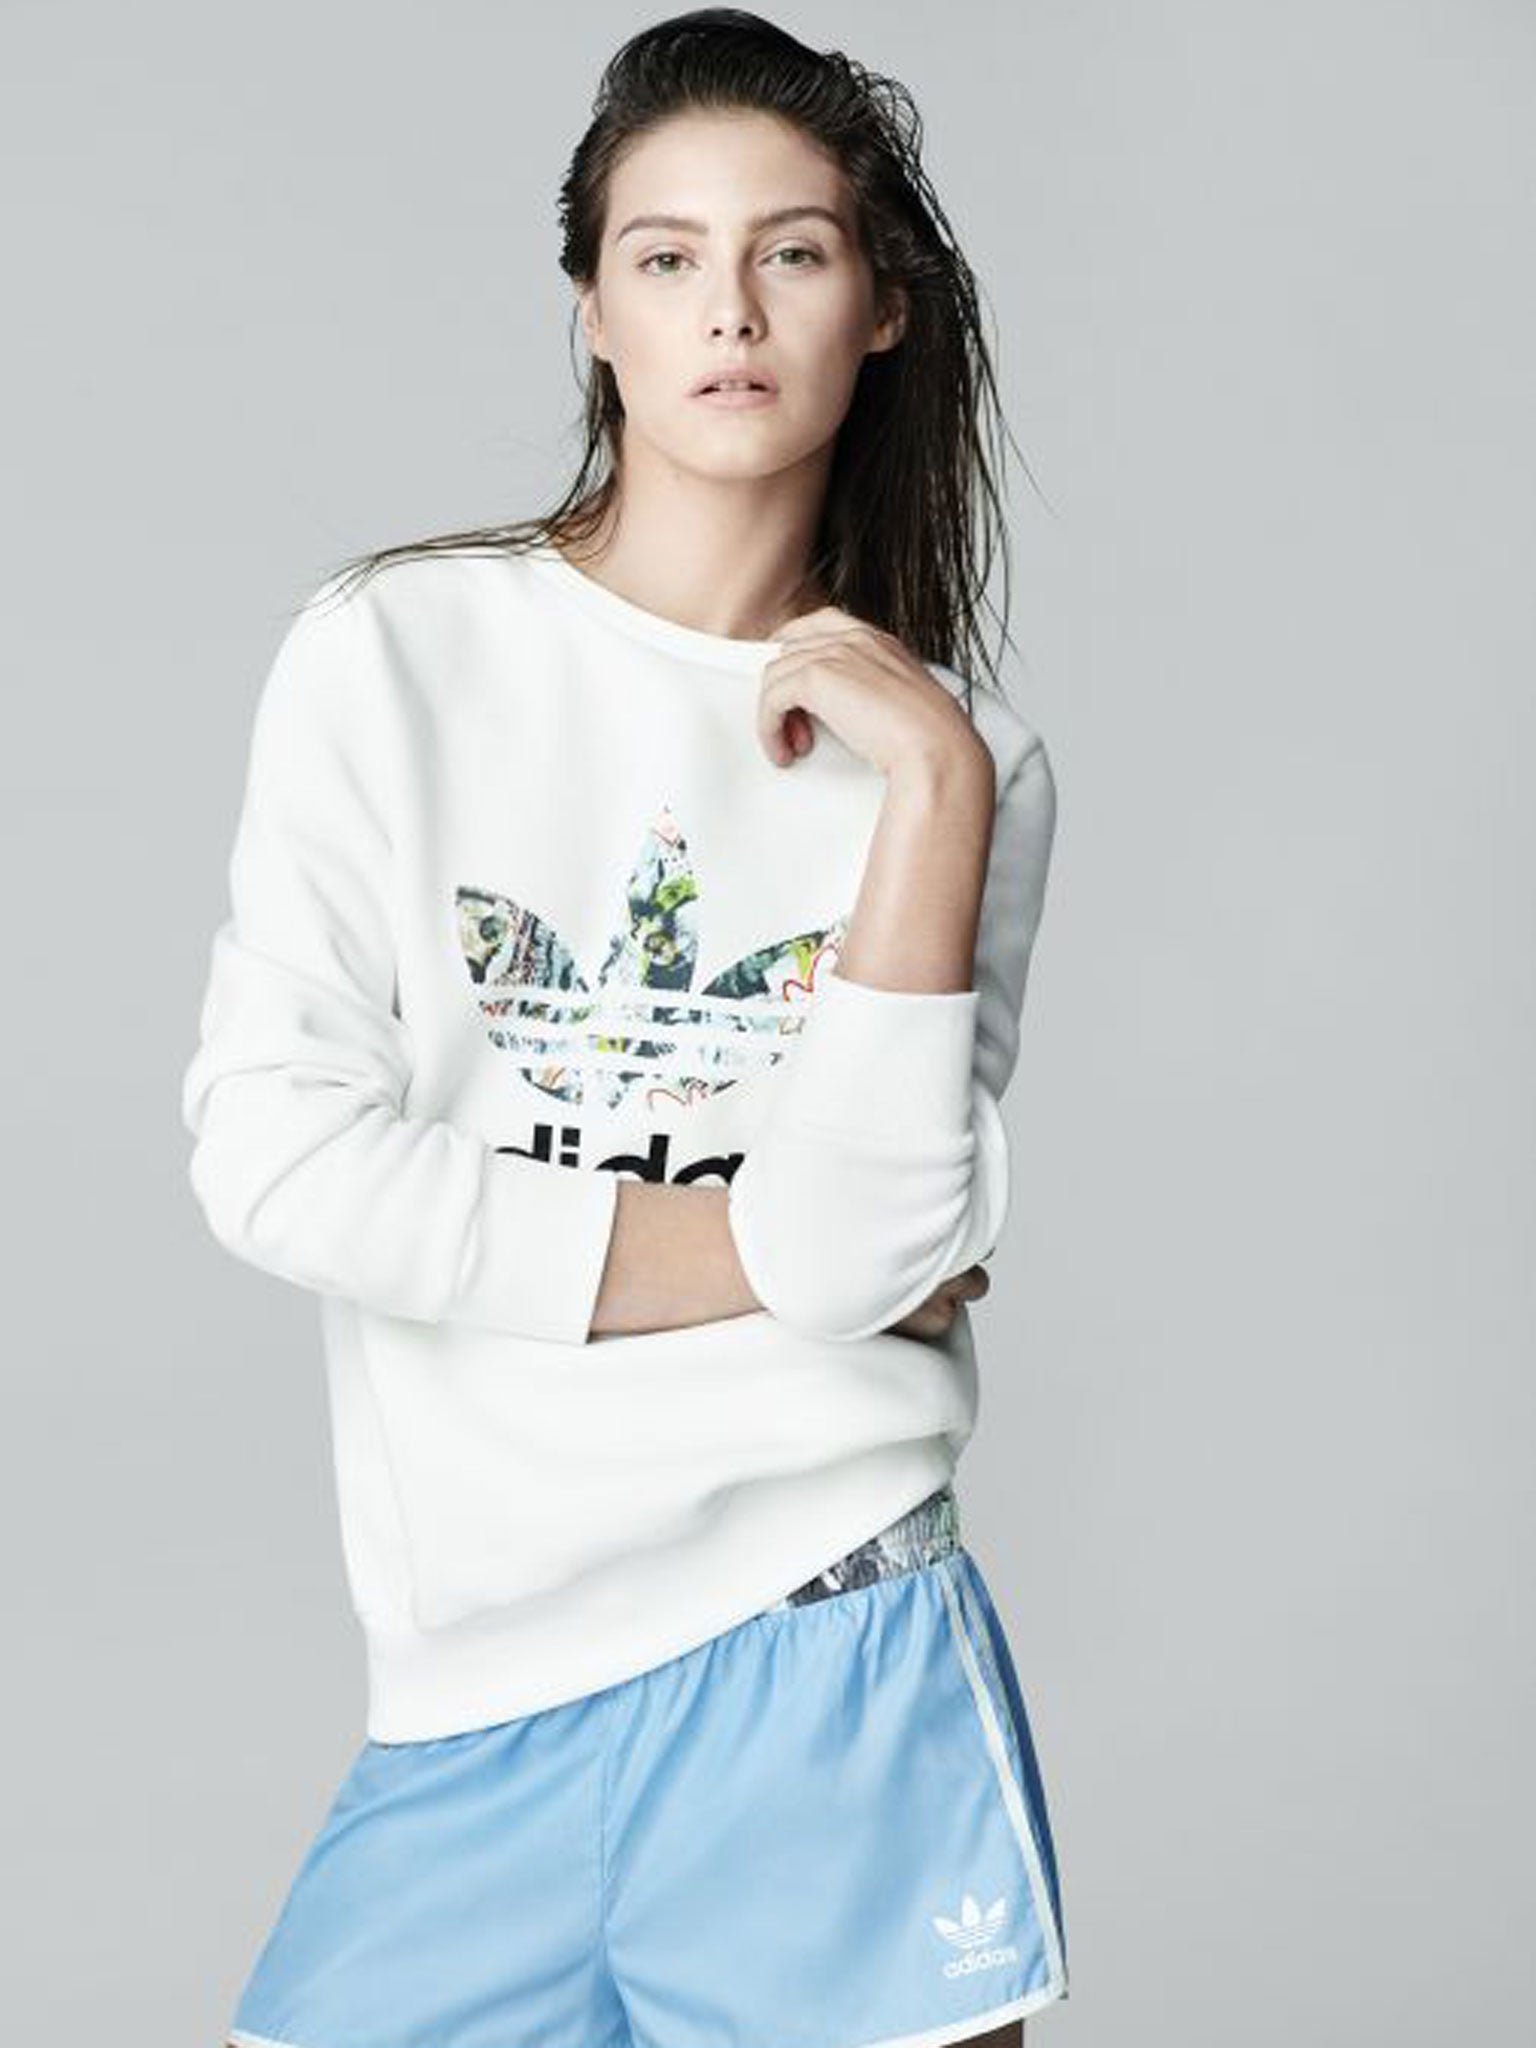 Adidas for Topshop collection: Ready, Set, Go! The